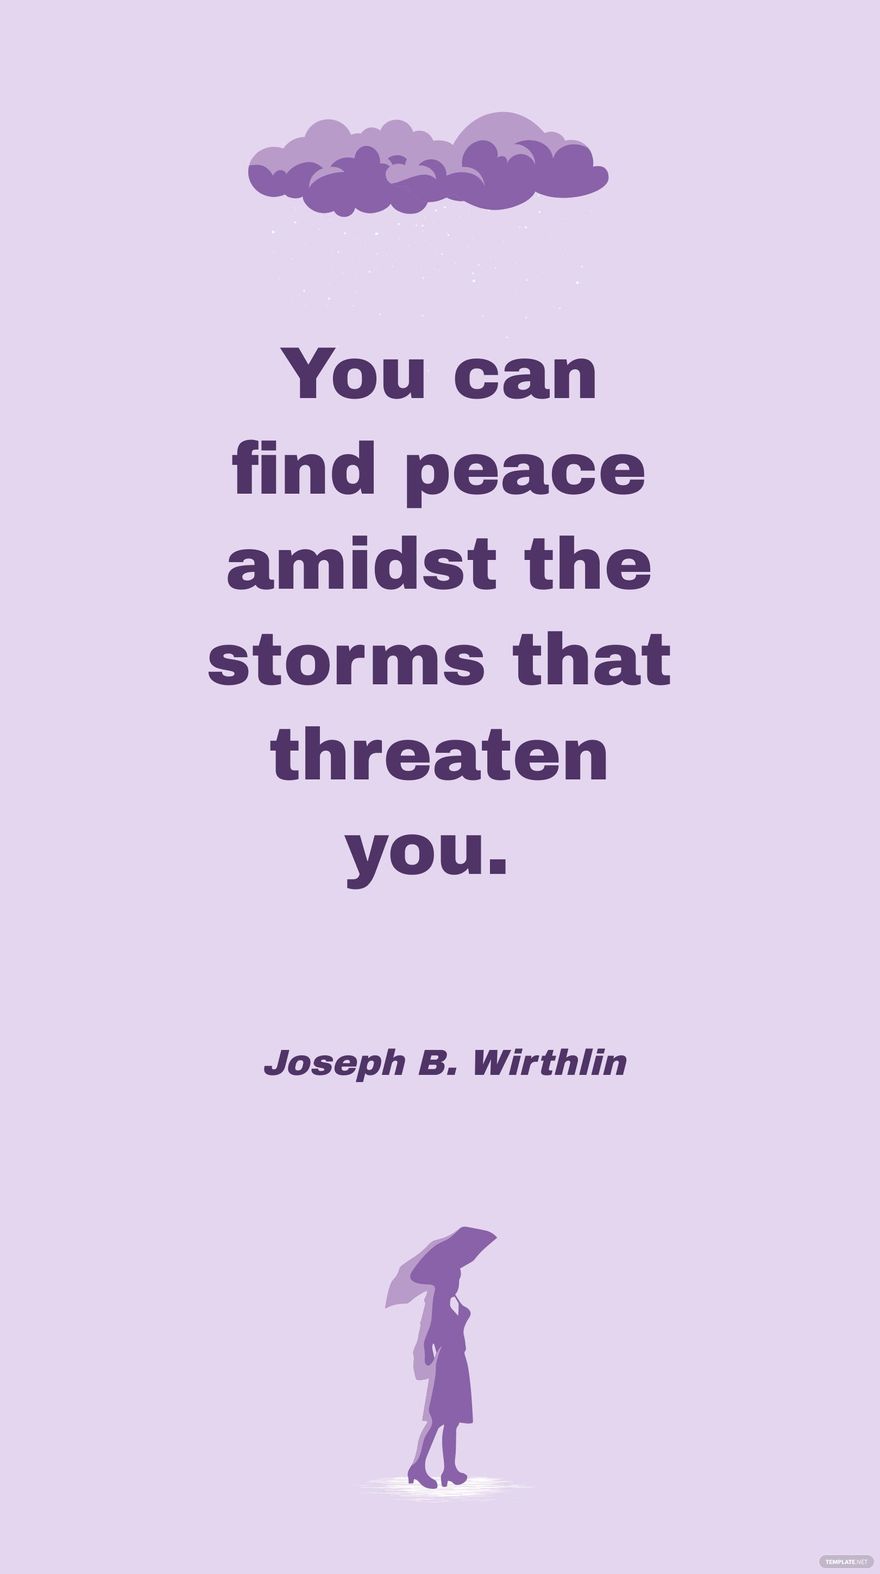 Free Joseph B. Wirthlin - You can find peace amidst the storms that threaten you. in JPG